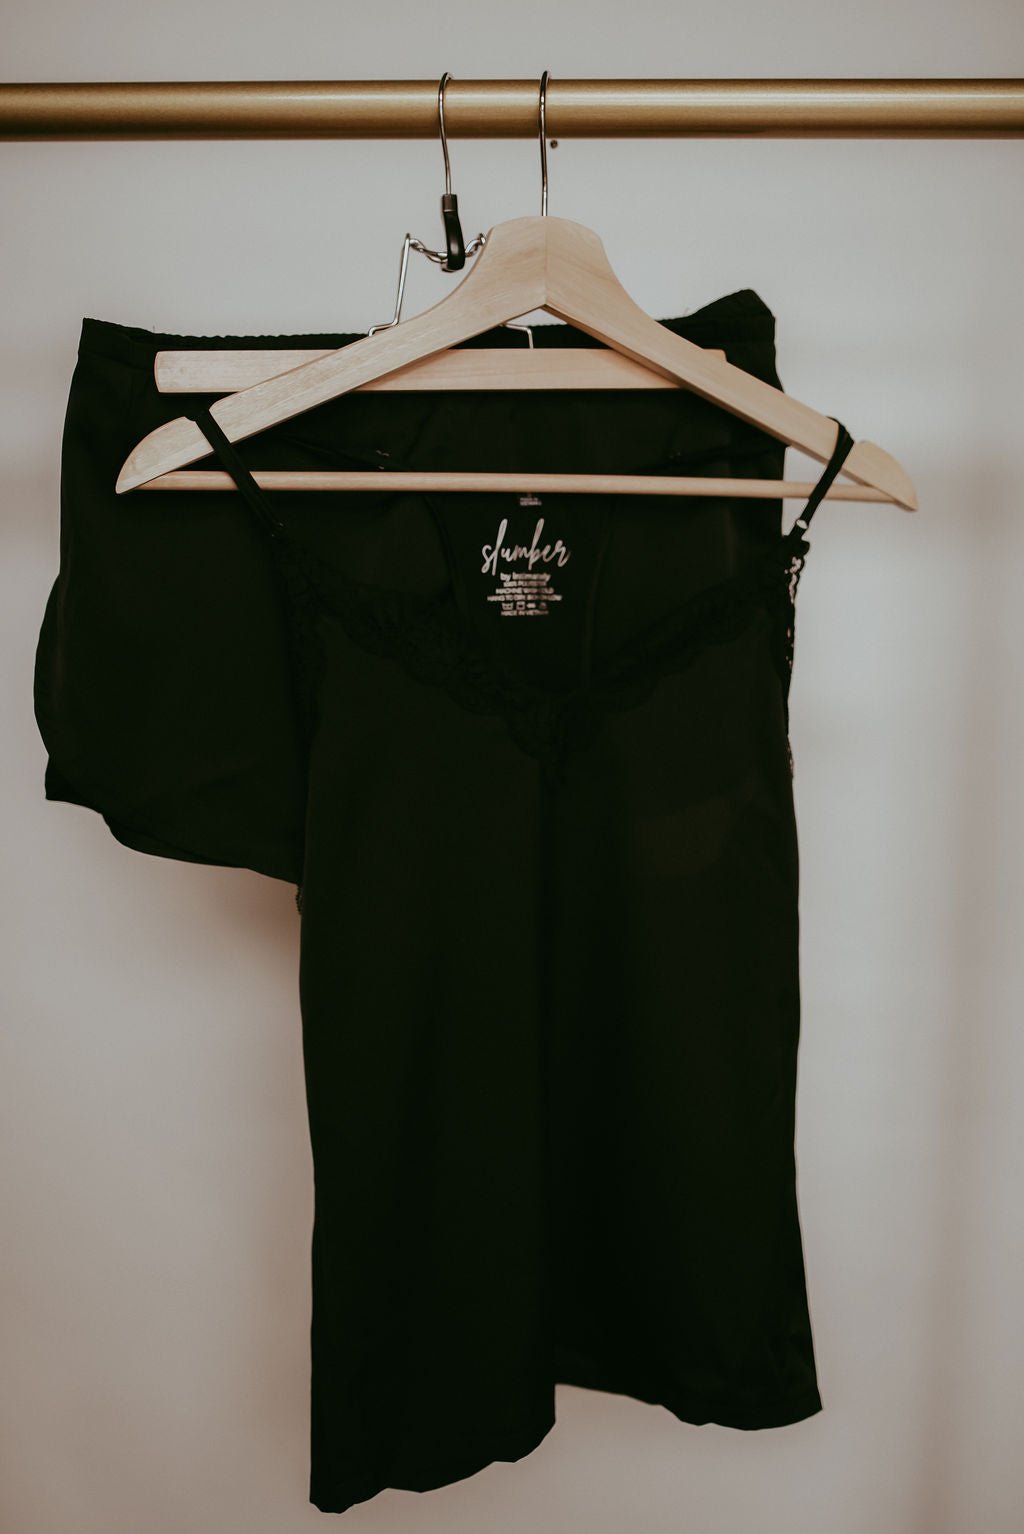 The intimately slumber pj shorts in black perfect to wear to bed. Soft to the touch and easy to get on and off.